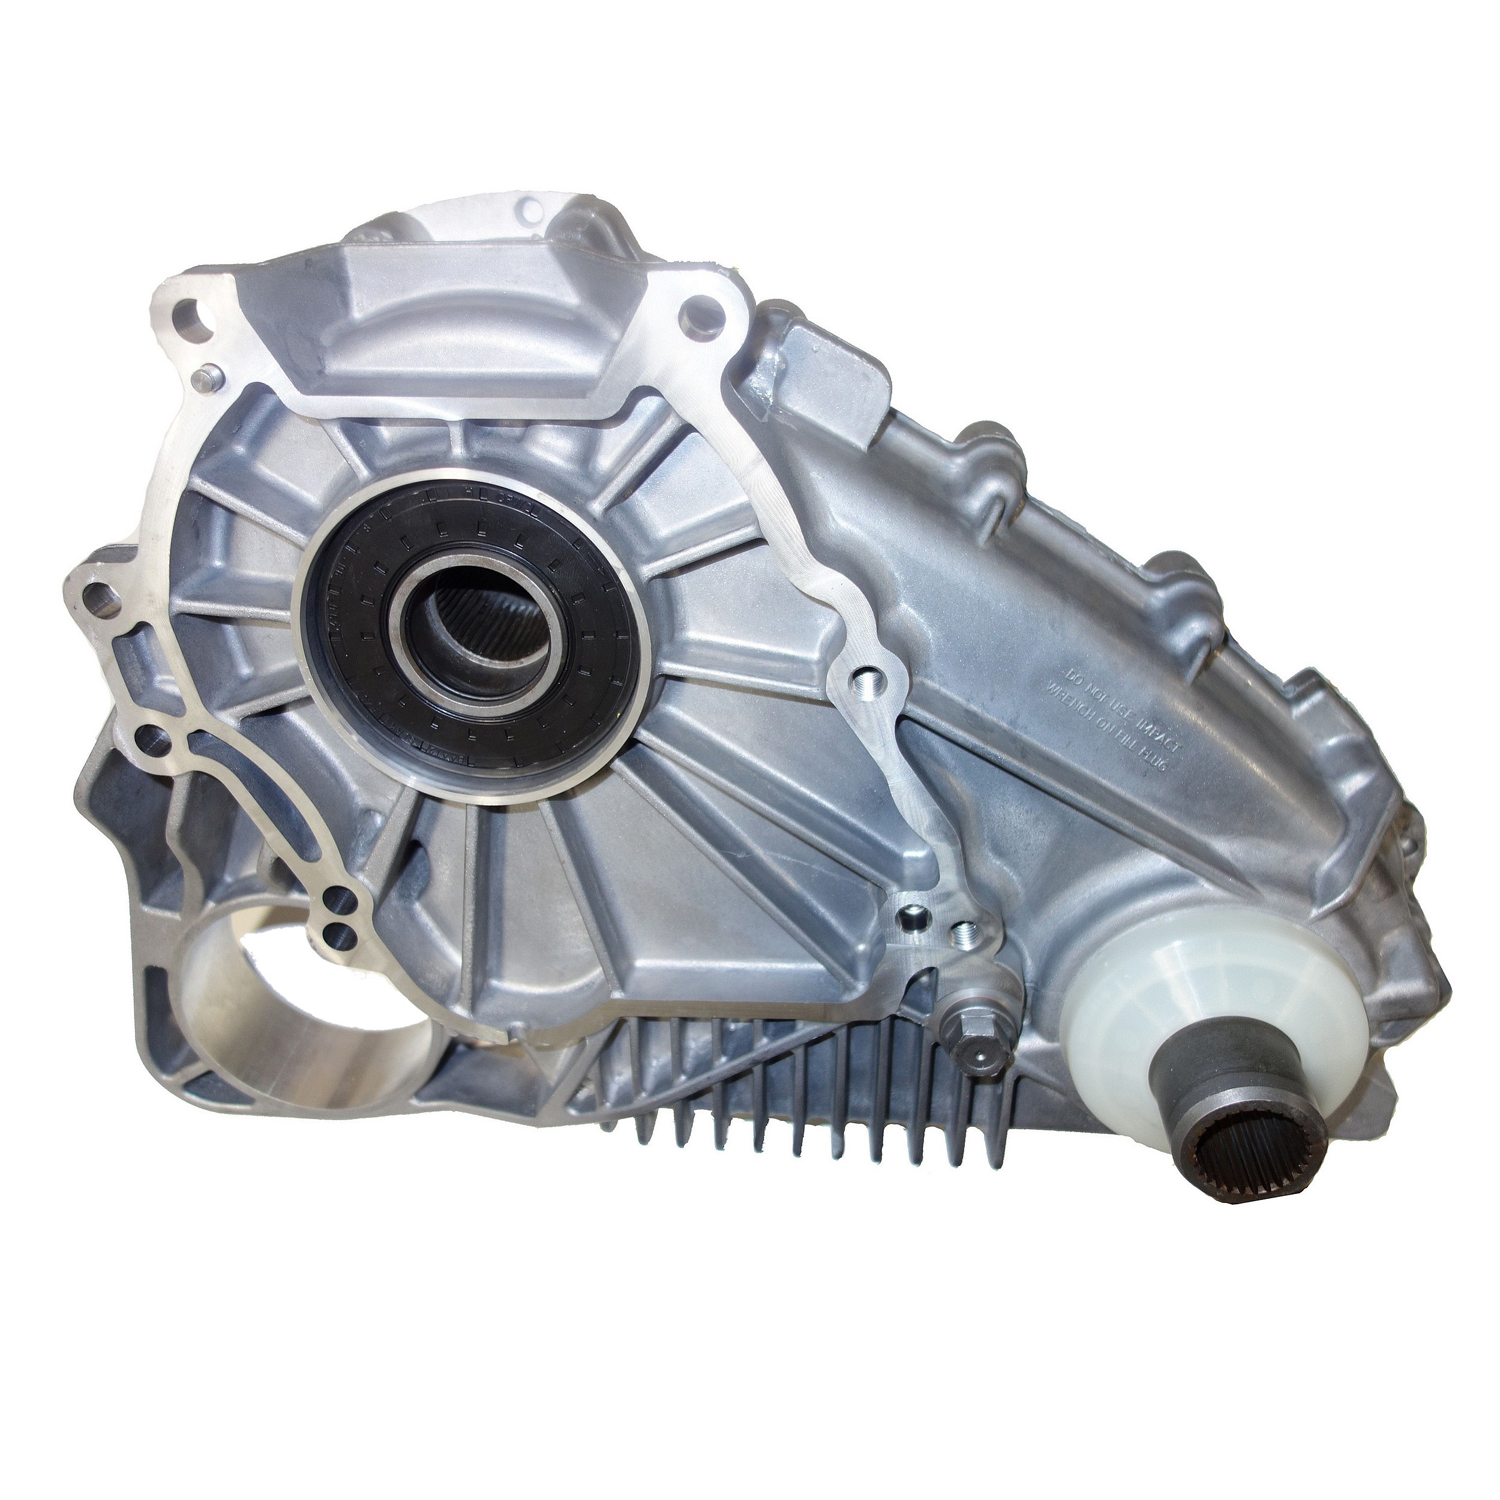 Remanufactured ATC500 Transfer Case Assembly, 2004-06 BMW X5